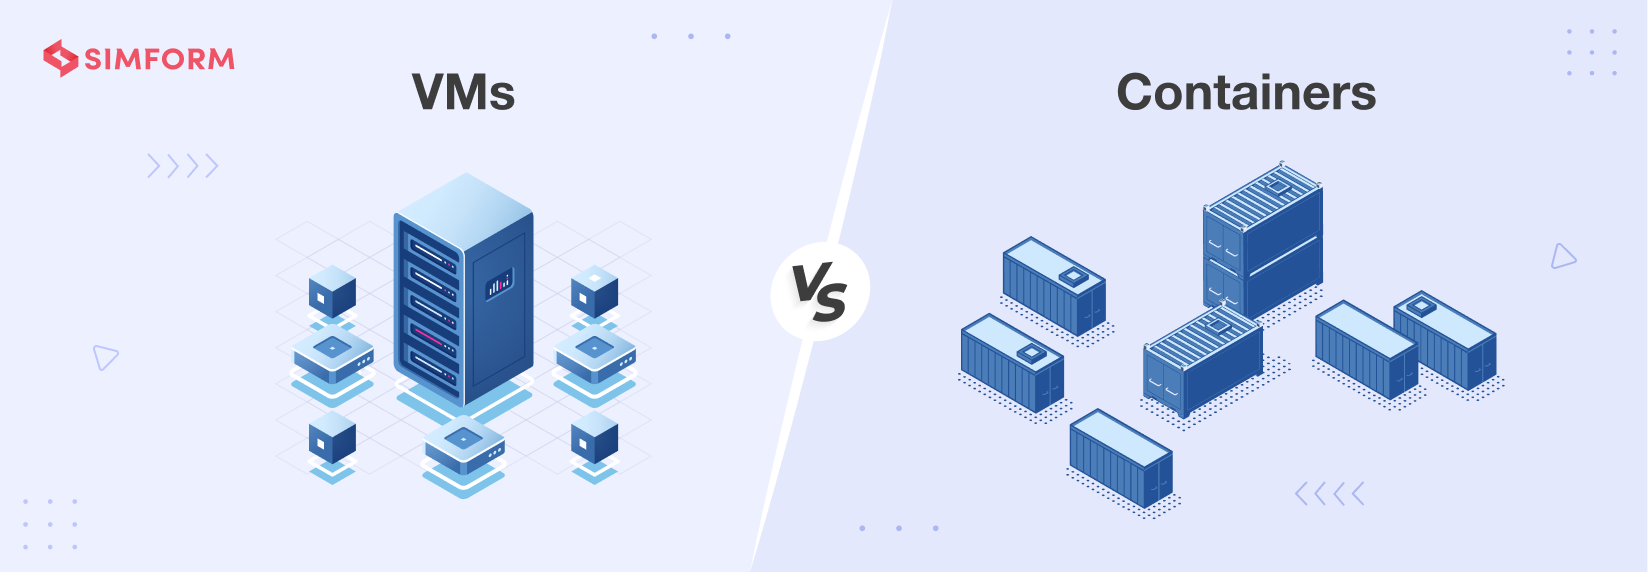 Does Kubernetes Really Perform Better on Bare Metal vs. VMs? - The